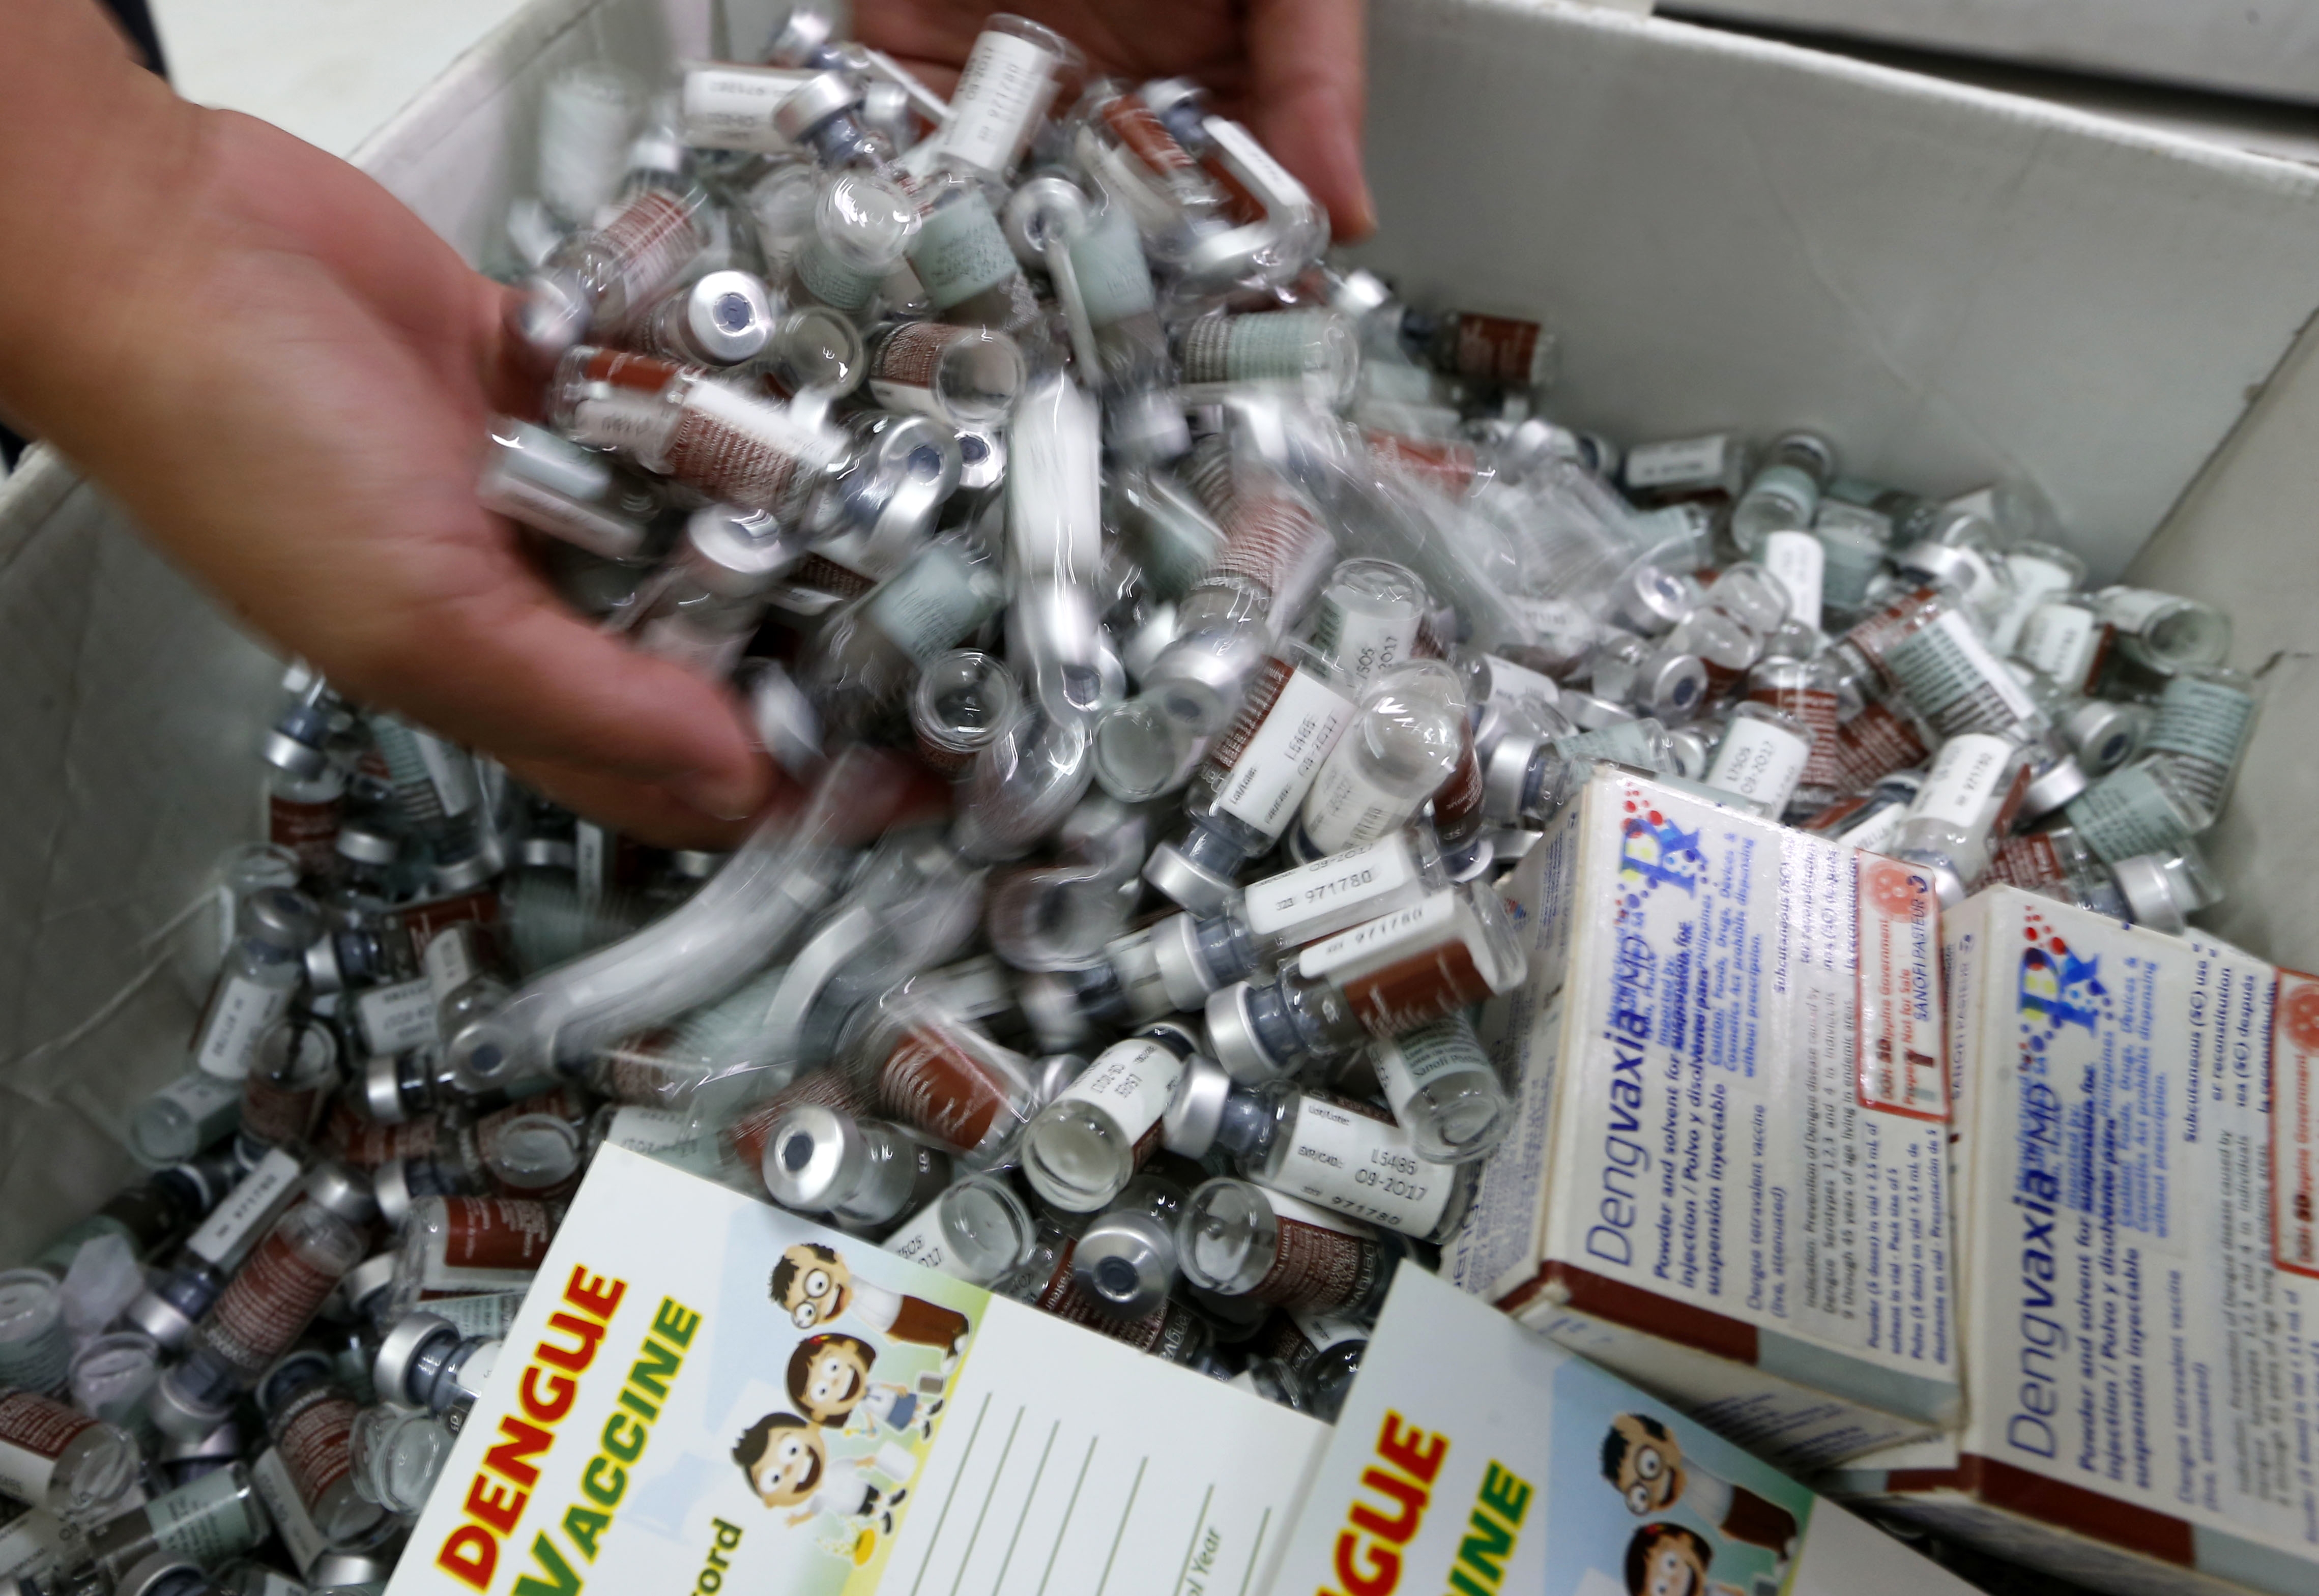 A Manila Health offricer scoops empty vials of the anti-dengue vaccine Dengvaxia inside the vaccine storage room Tuesday, Dec. 5, 2017 in Manila, Philippines. The controversial vaccine, manufactured by Sanofi Pasteur and administered to more than 700,000 Filipino children, was put on hold by the Philippines last week after new study findings showed it posed risks of severe cases in people without previous infection. The drug was recalled Tuesday from local health centers following the controversy. (AP Photo/Bullit Marquez)